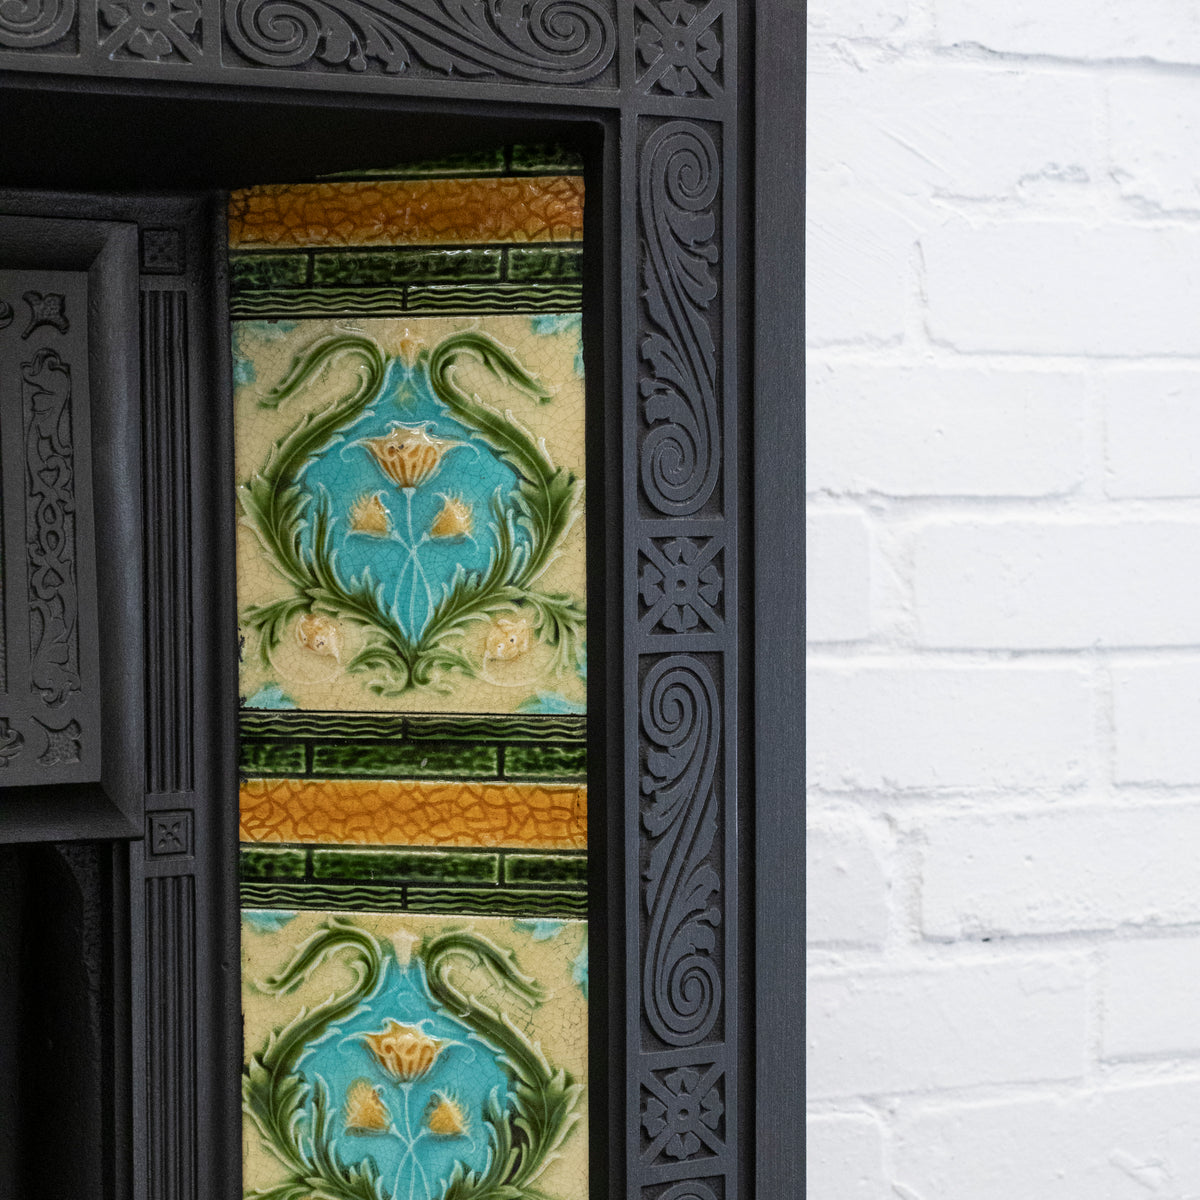 Antique Cast iron Fireplace Insert with Green &amp; Blue Tiles | The Architectural Forum